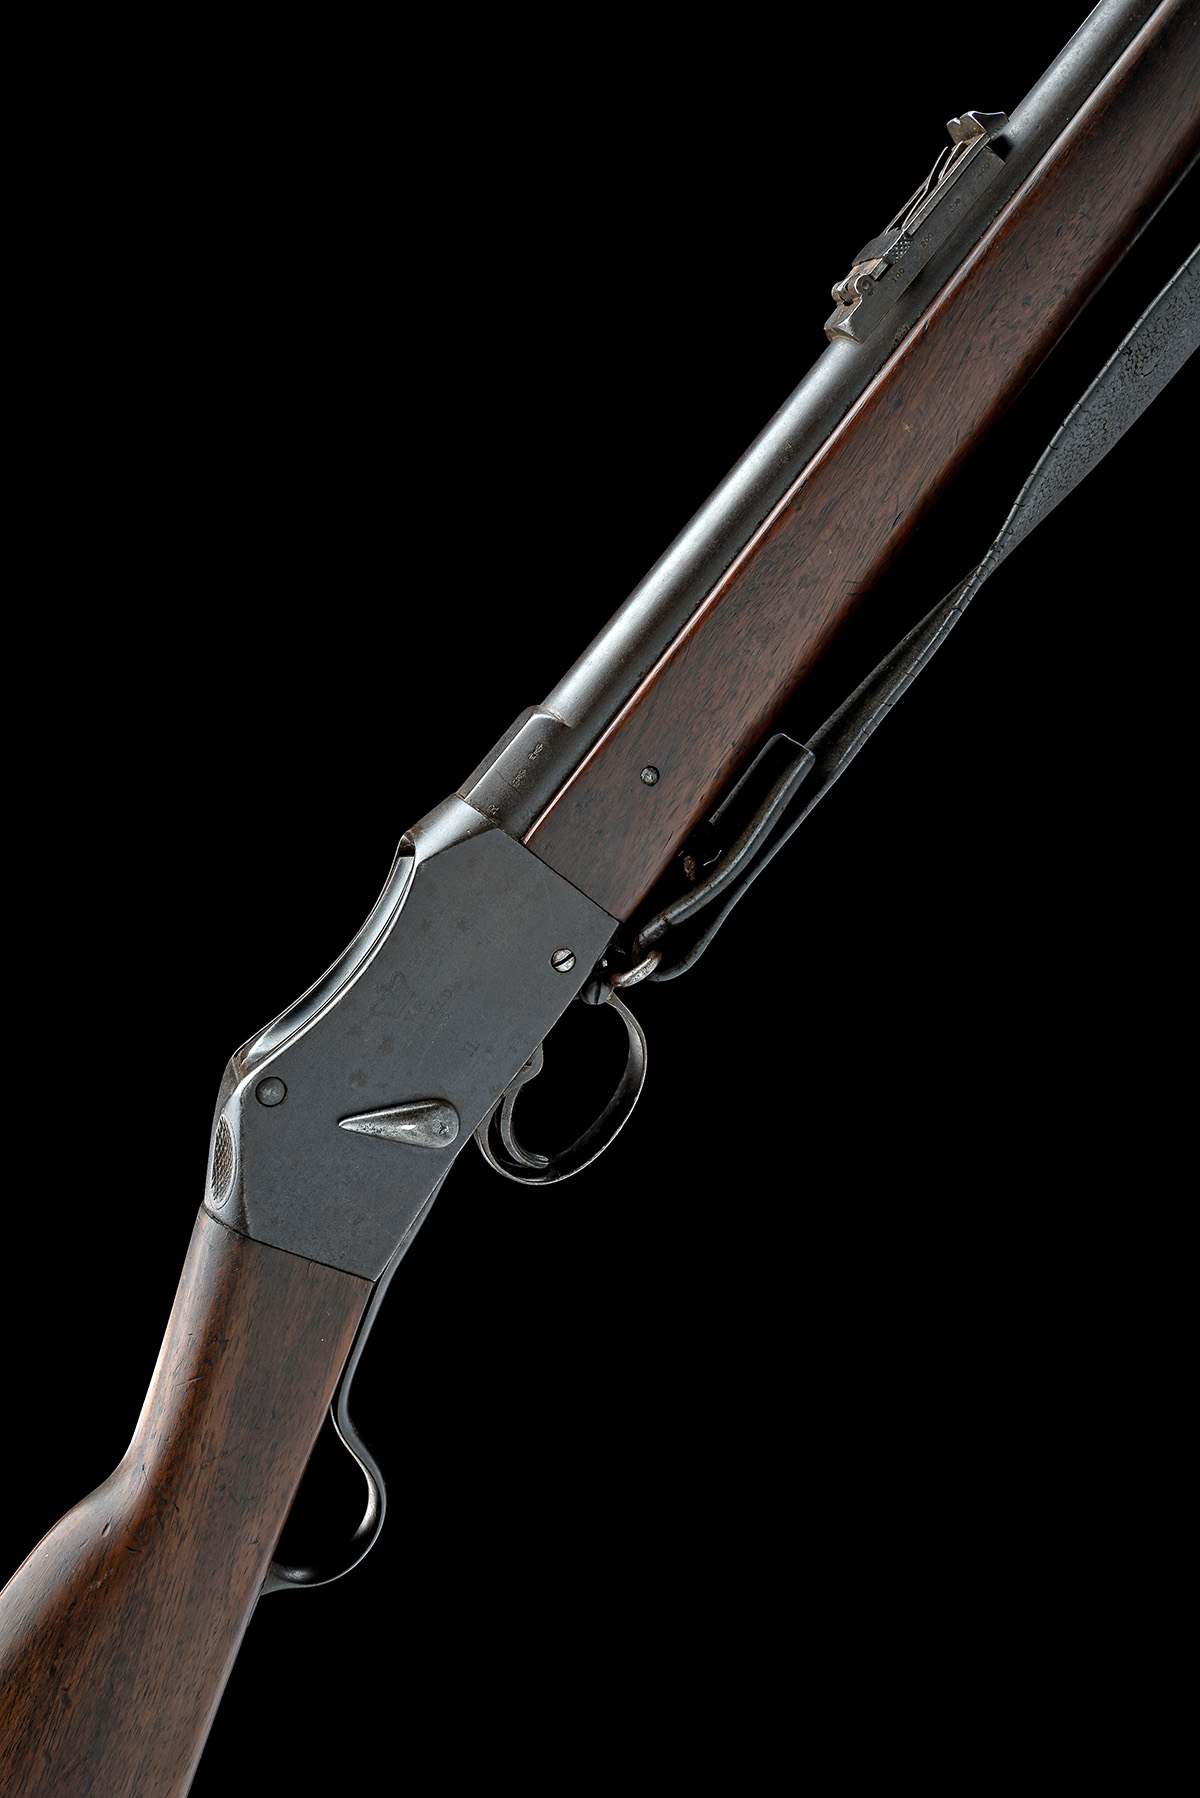 A .577/450 MARTINI HENRY MK II ENFIELD SERVICE RIFLE, DATED 1885, no visible serial number, with